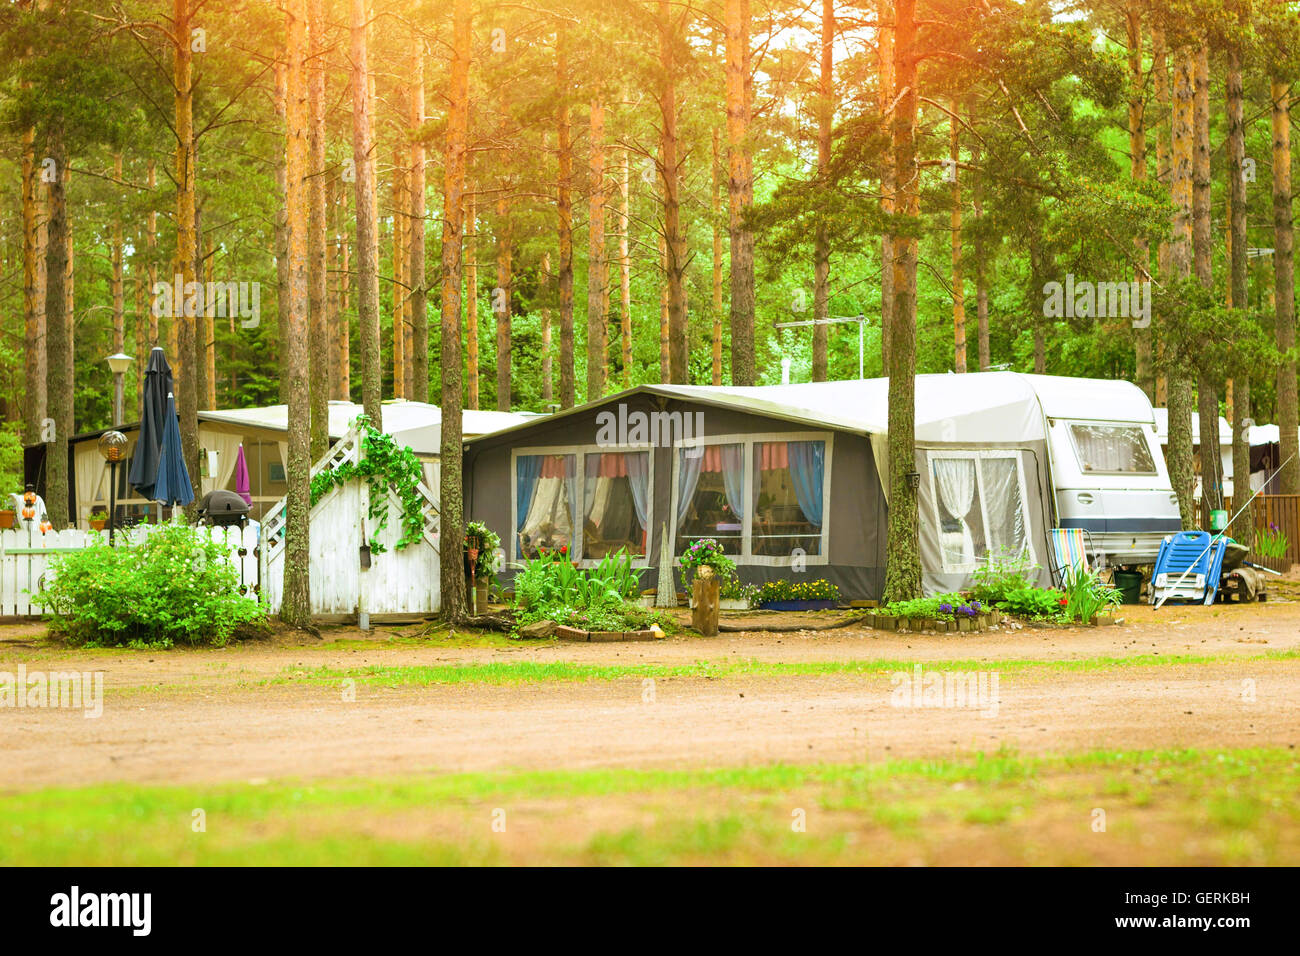 Summer outdoor recreation, Scandinavian vacation. Camping vans and tents parked in a wooded campsite among pine trees. Finland Stock Photo